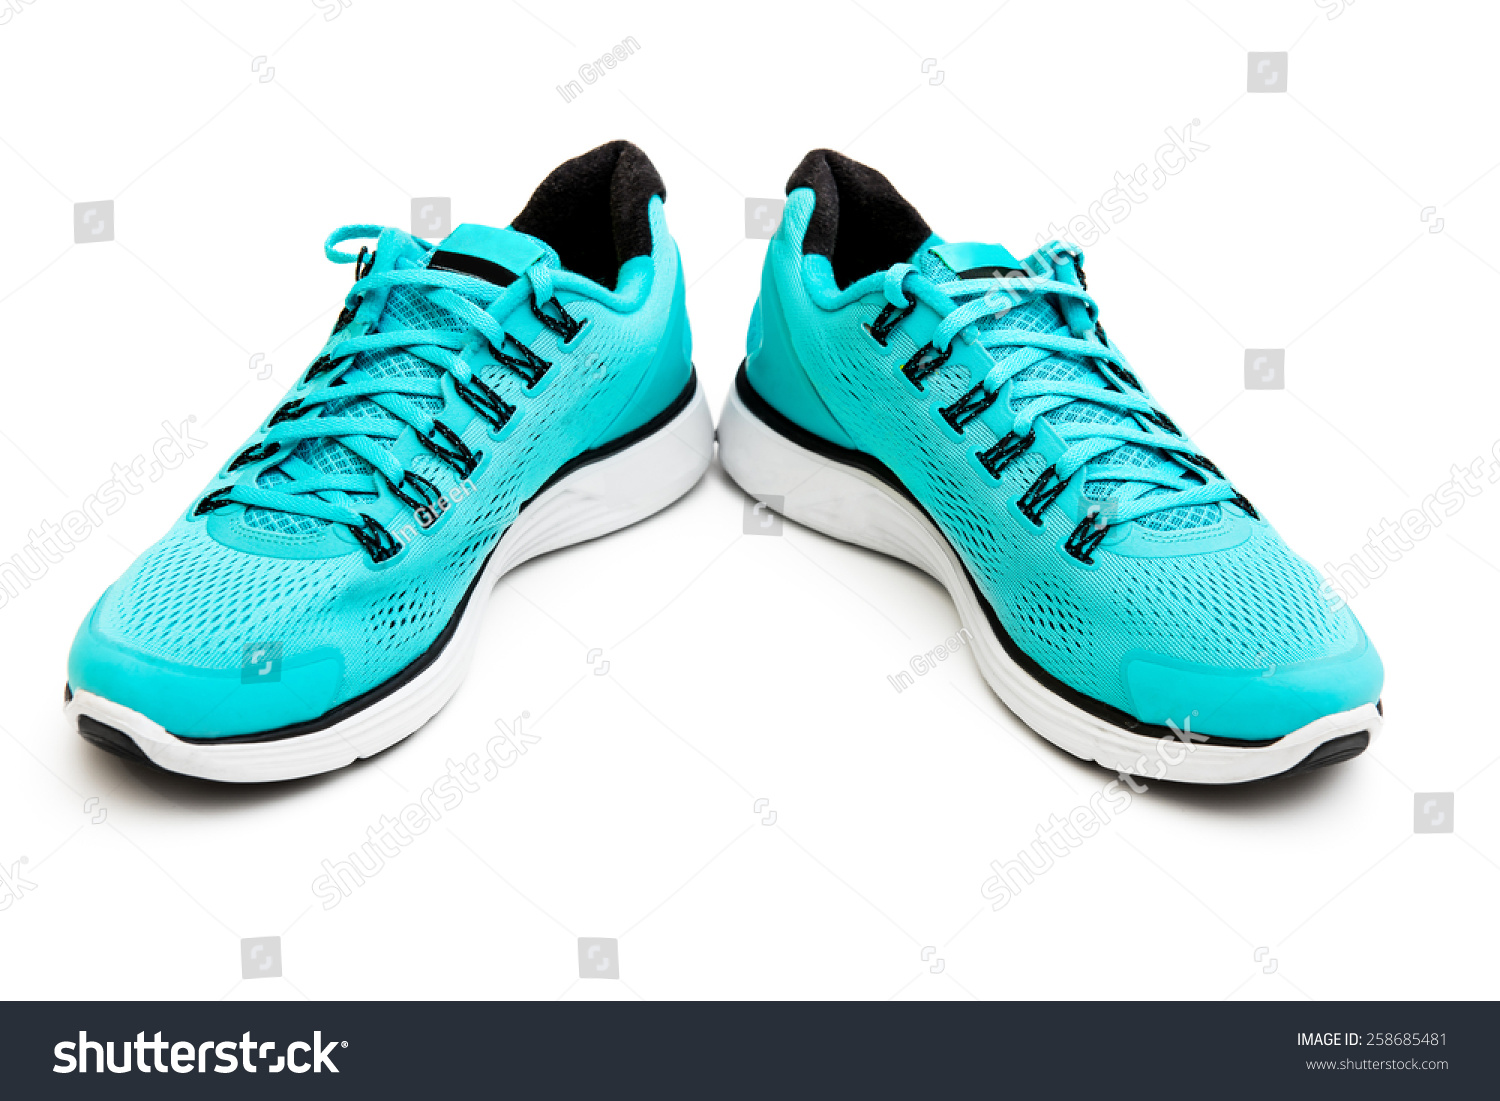 Blue Running Shoes Isolated On White Stock Photo 258685481 | Shutterstock